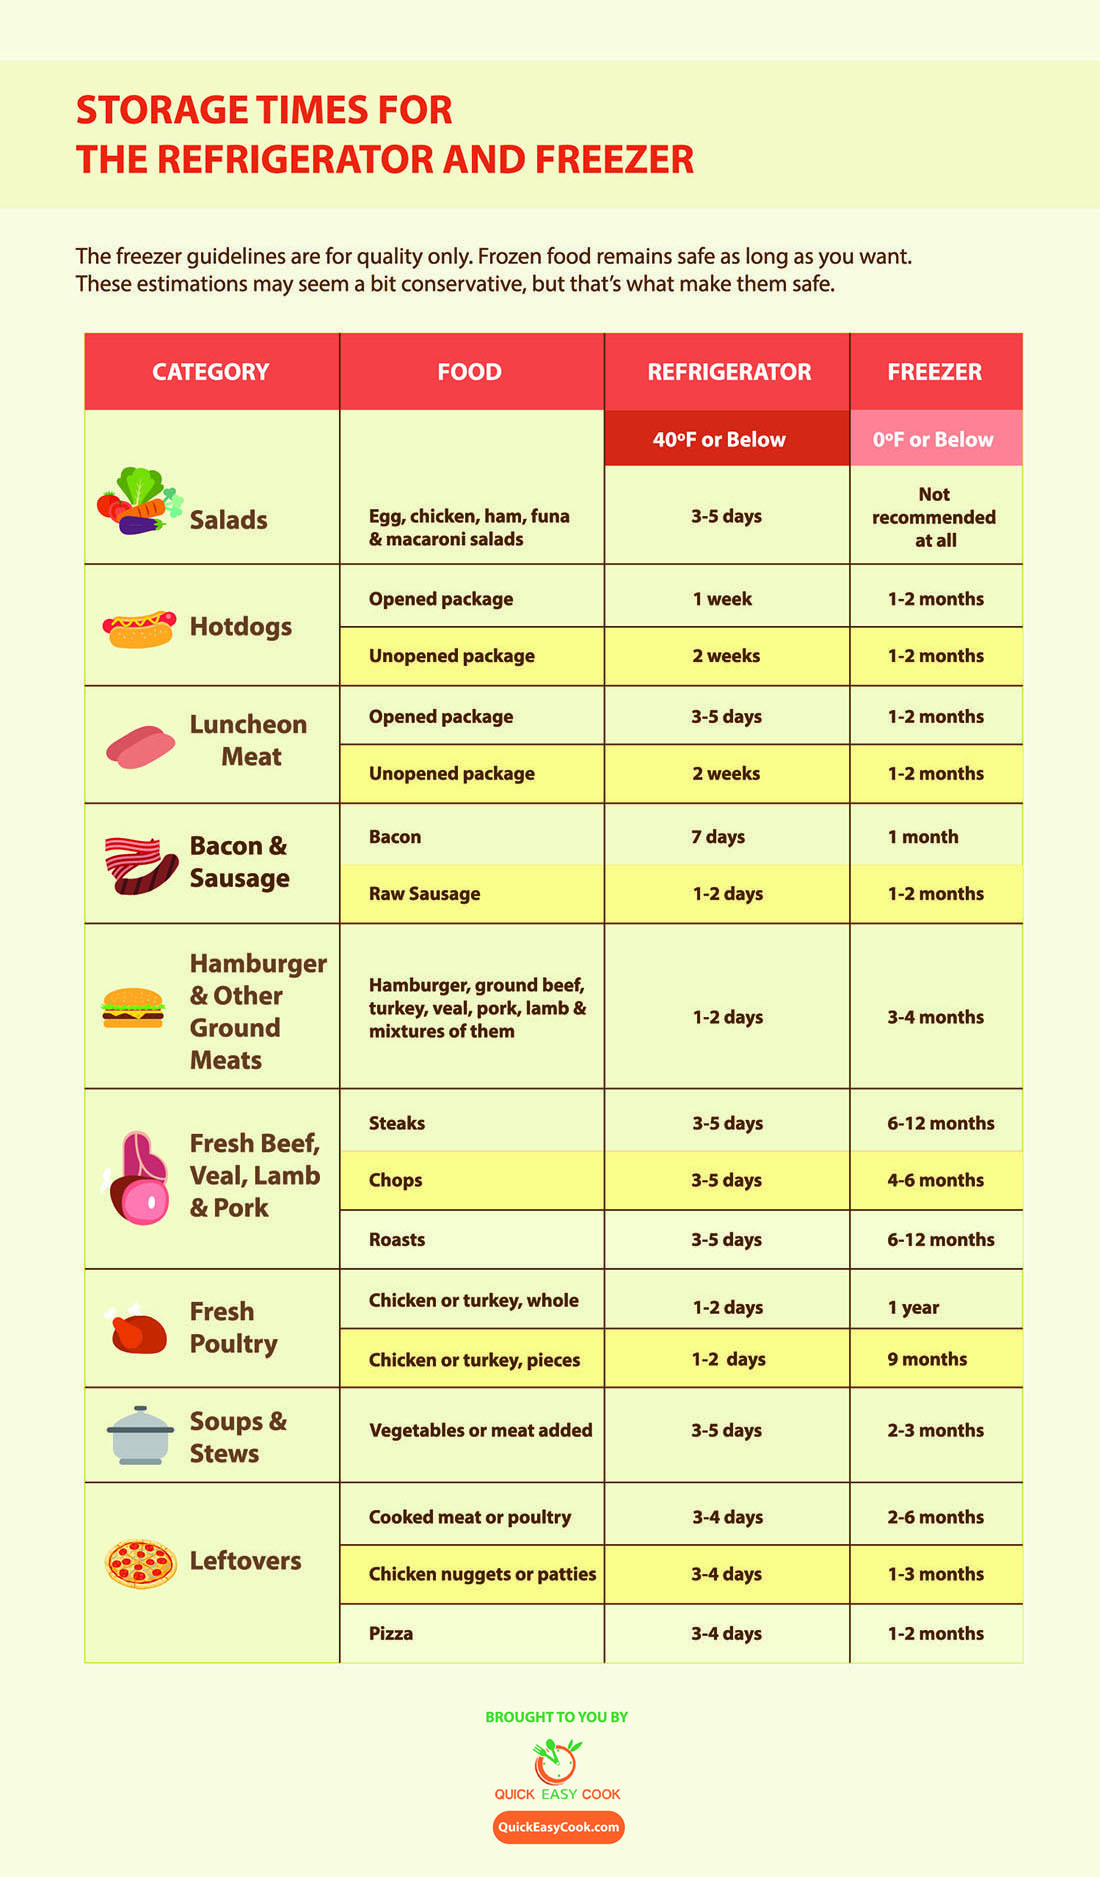 Storage Times for the Refrigerator and Freezer Infographic